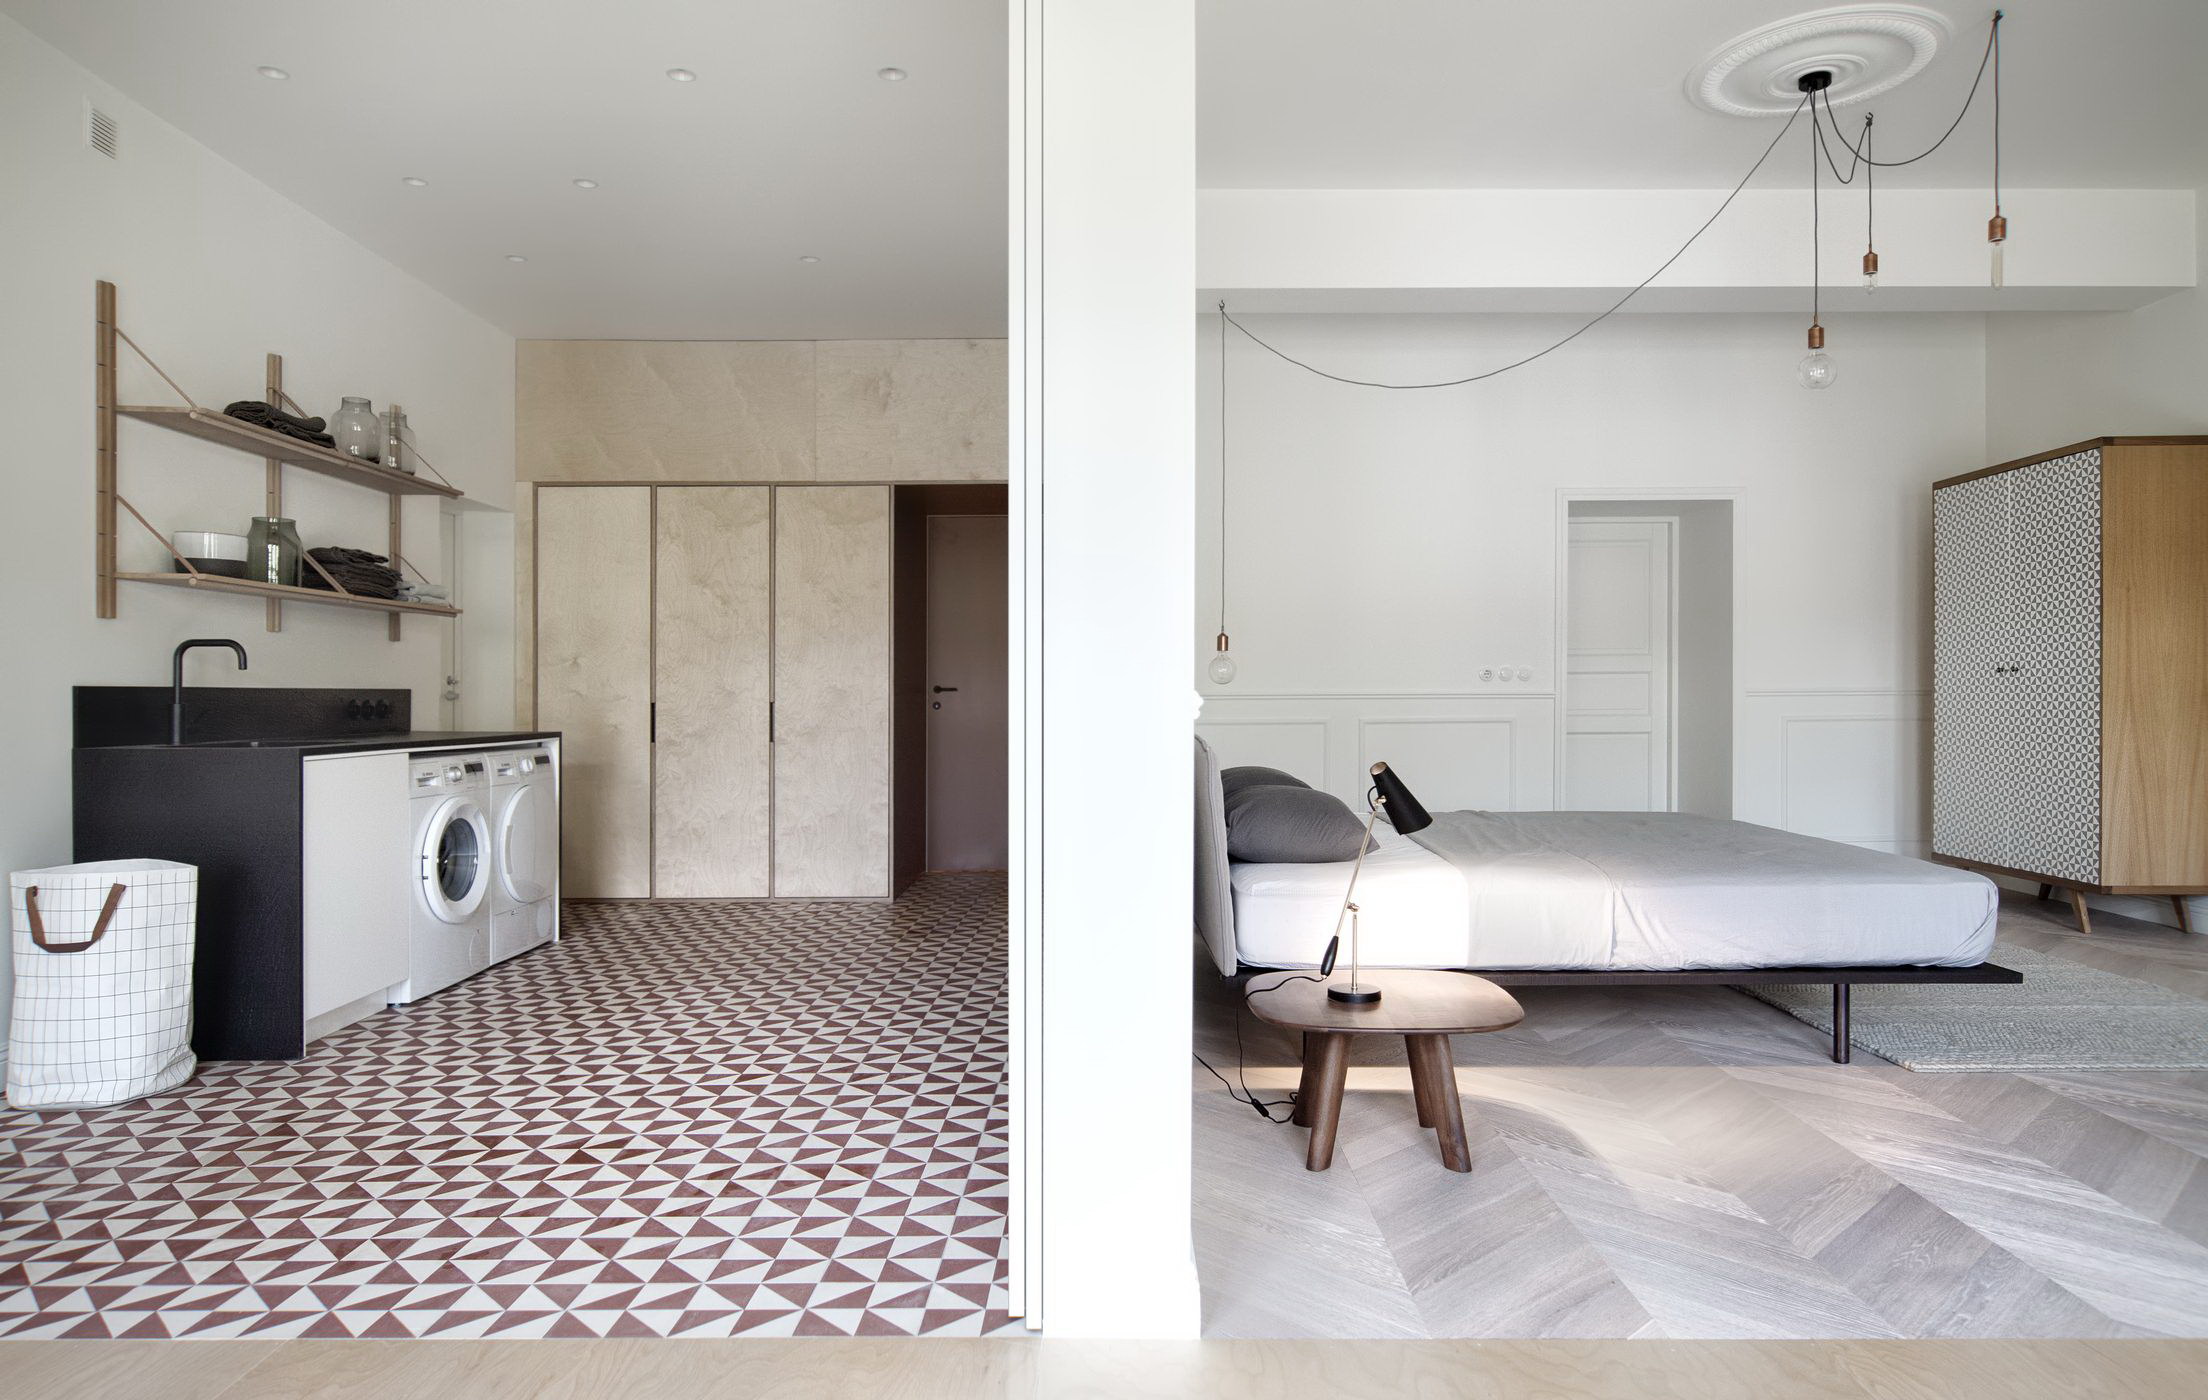 Interior KG | Renovated Apartment in Old Revenue House by INT2 architecture